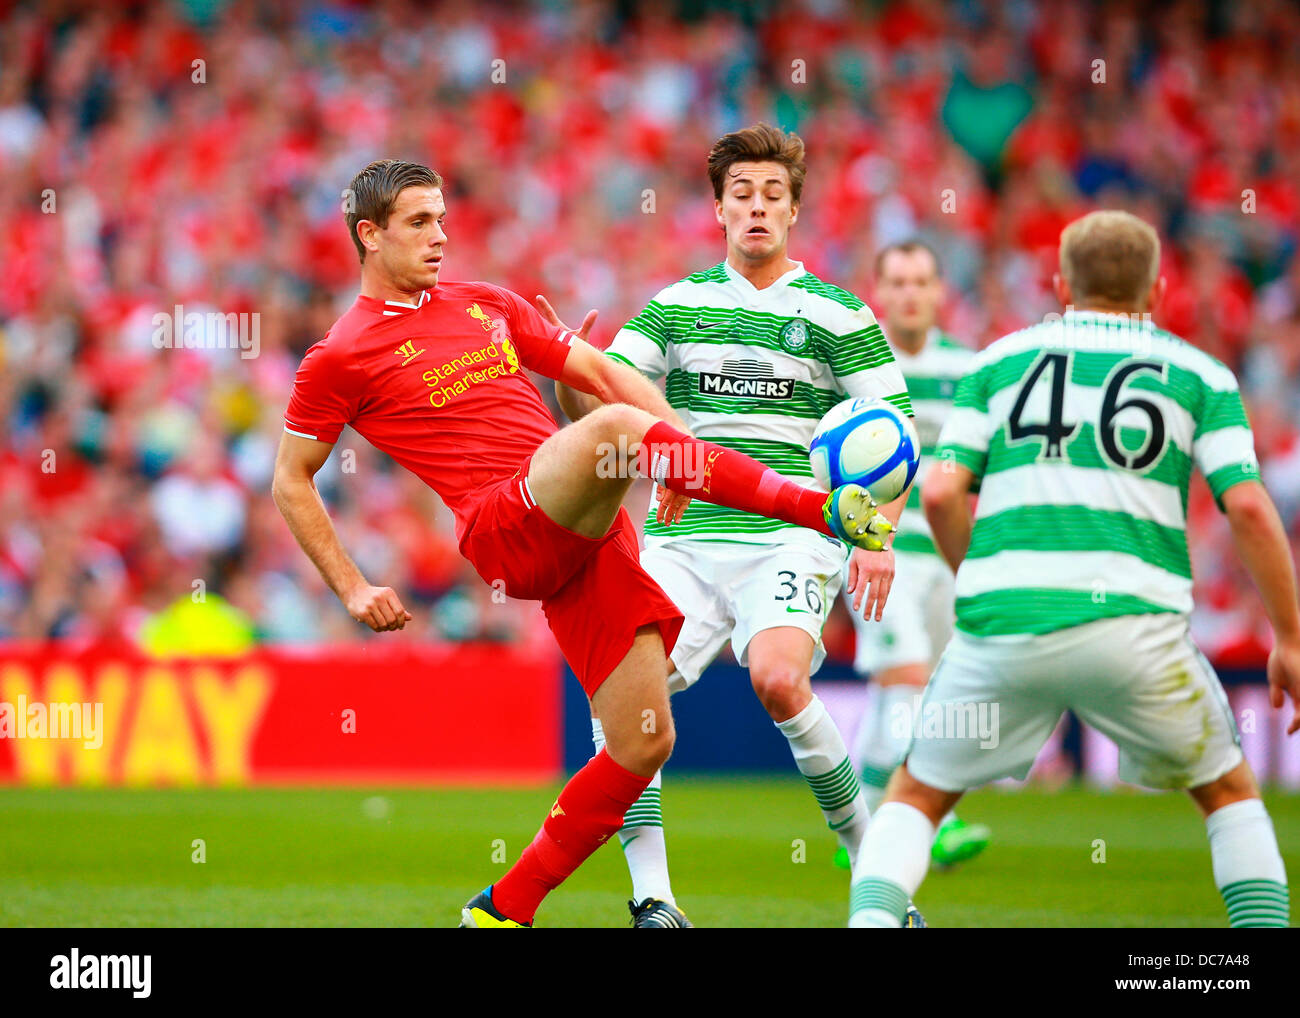 Dublin, Ireland. 10th Aug, 2013. Jordan Henderson (Liverpool) plays the ball under pressure from the Celtic defence during The Dublin Decider Football game between Liverpool FC and Glasgow Celtic from the Aviva Stadium. Credit:  Action Plus Sports/Alamy Live News Stock Photo